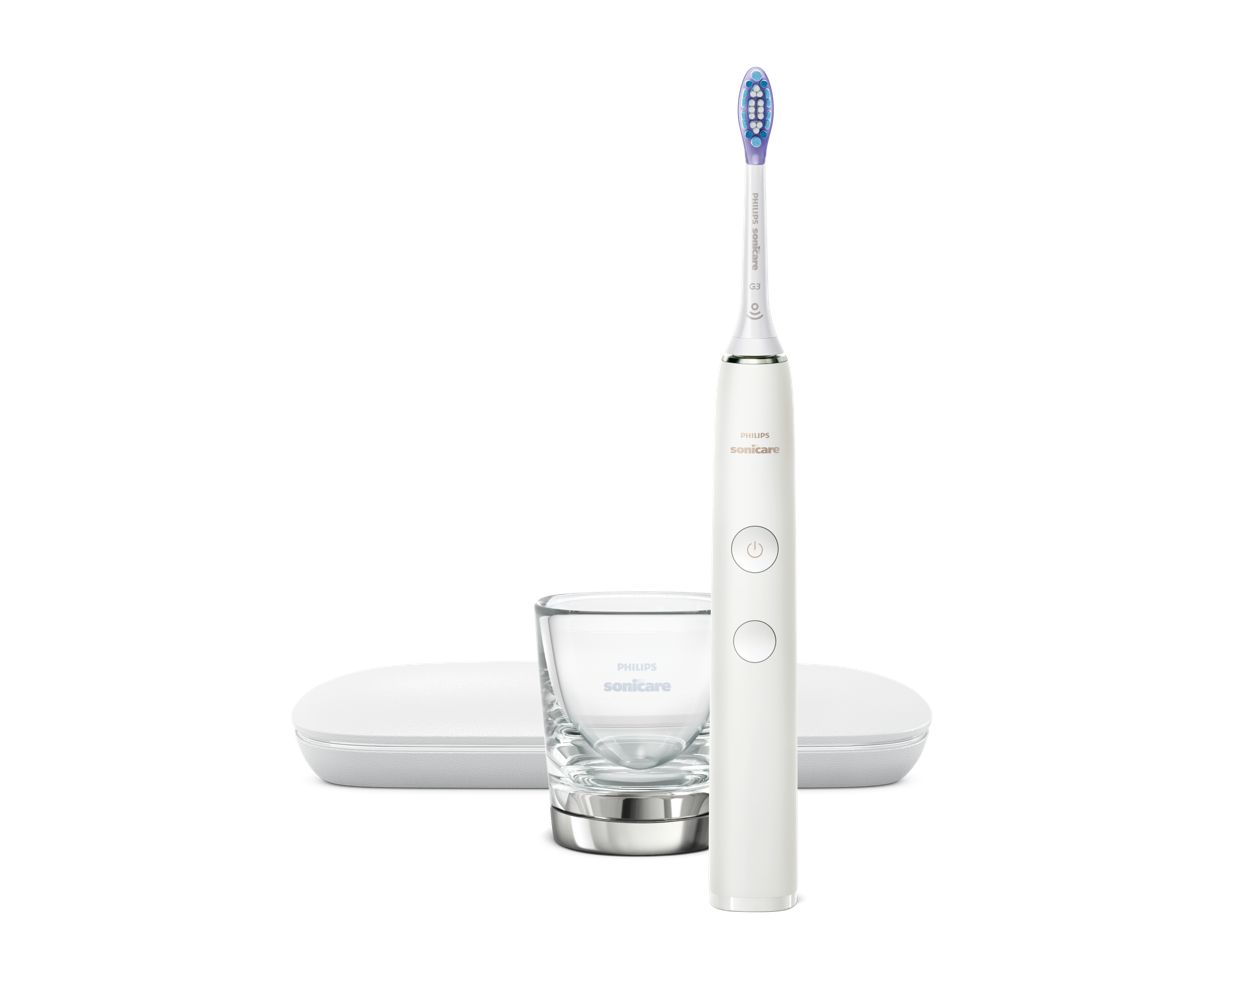 DiamondClean 9000 Sonic electric toothbrush with app HX9911/76